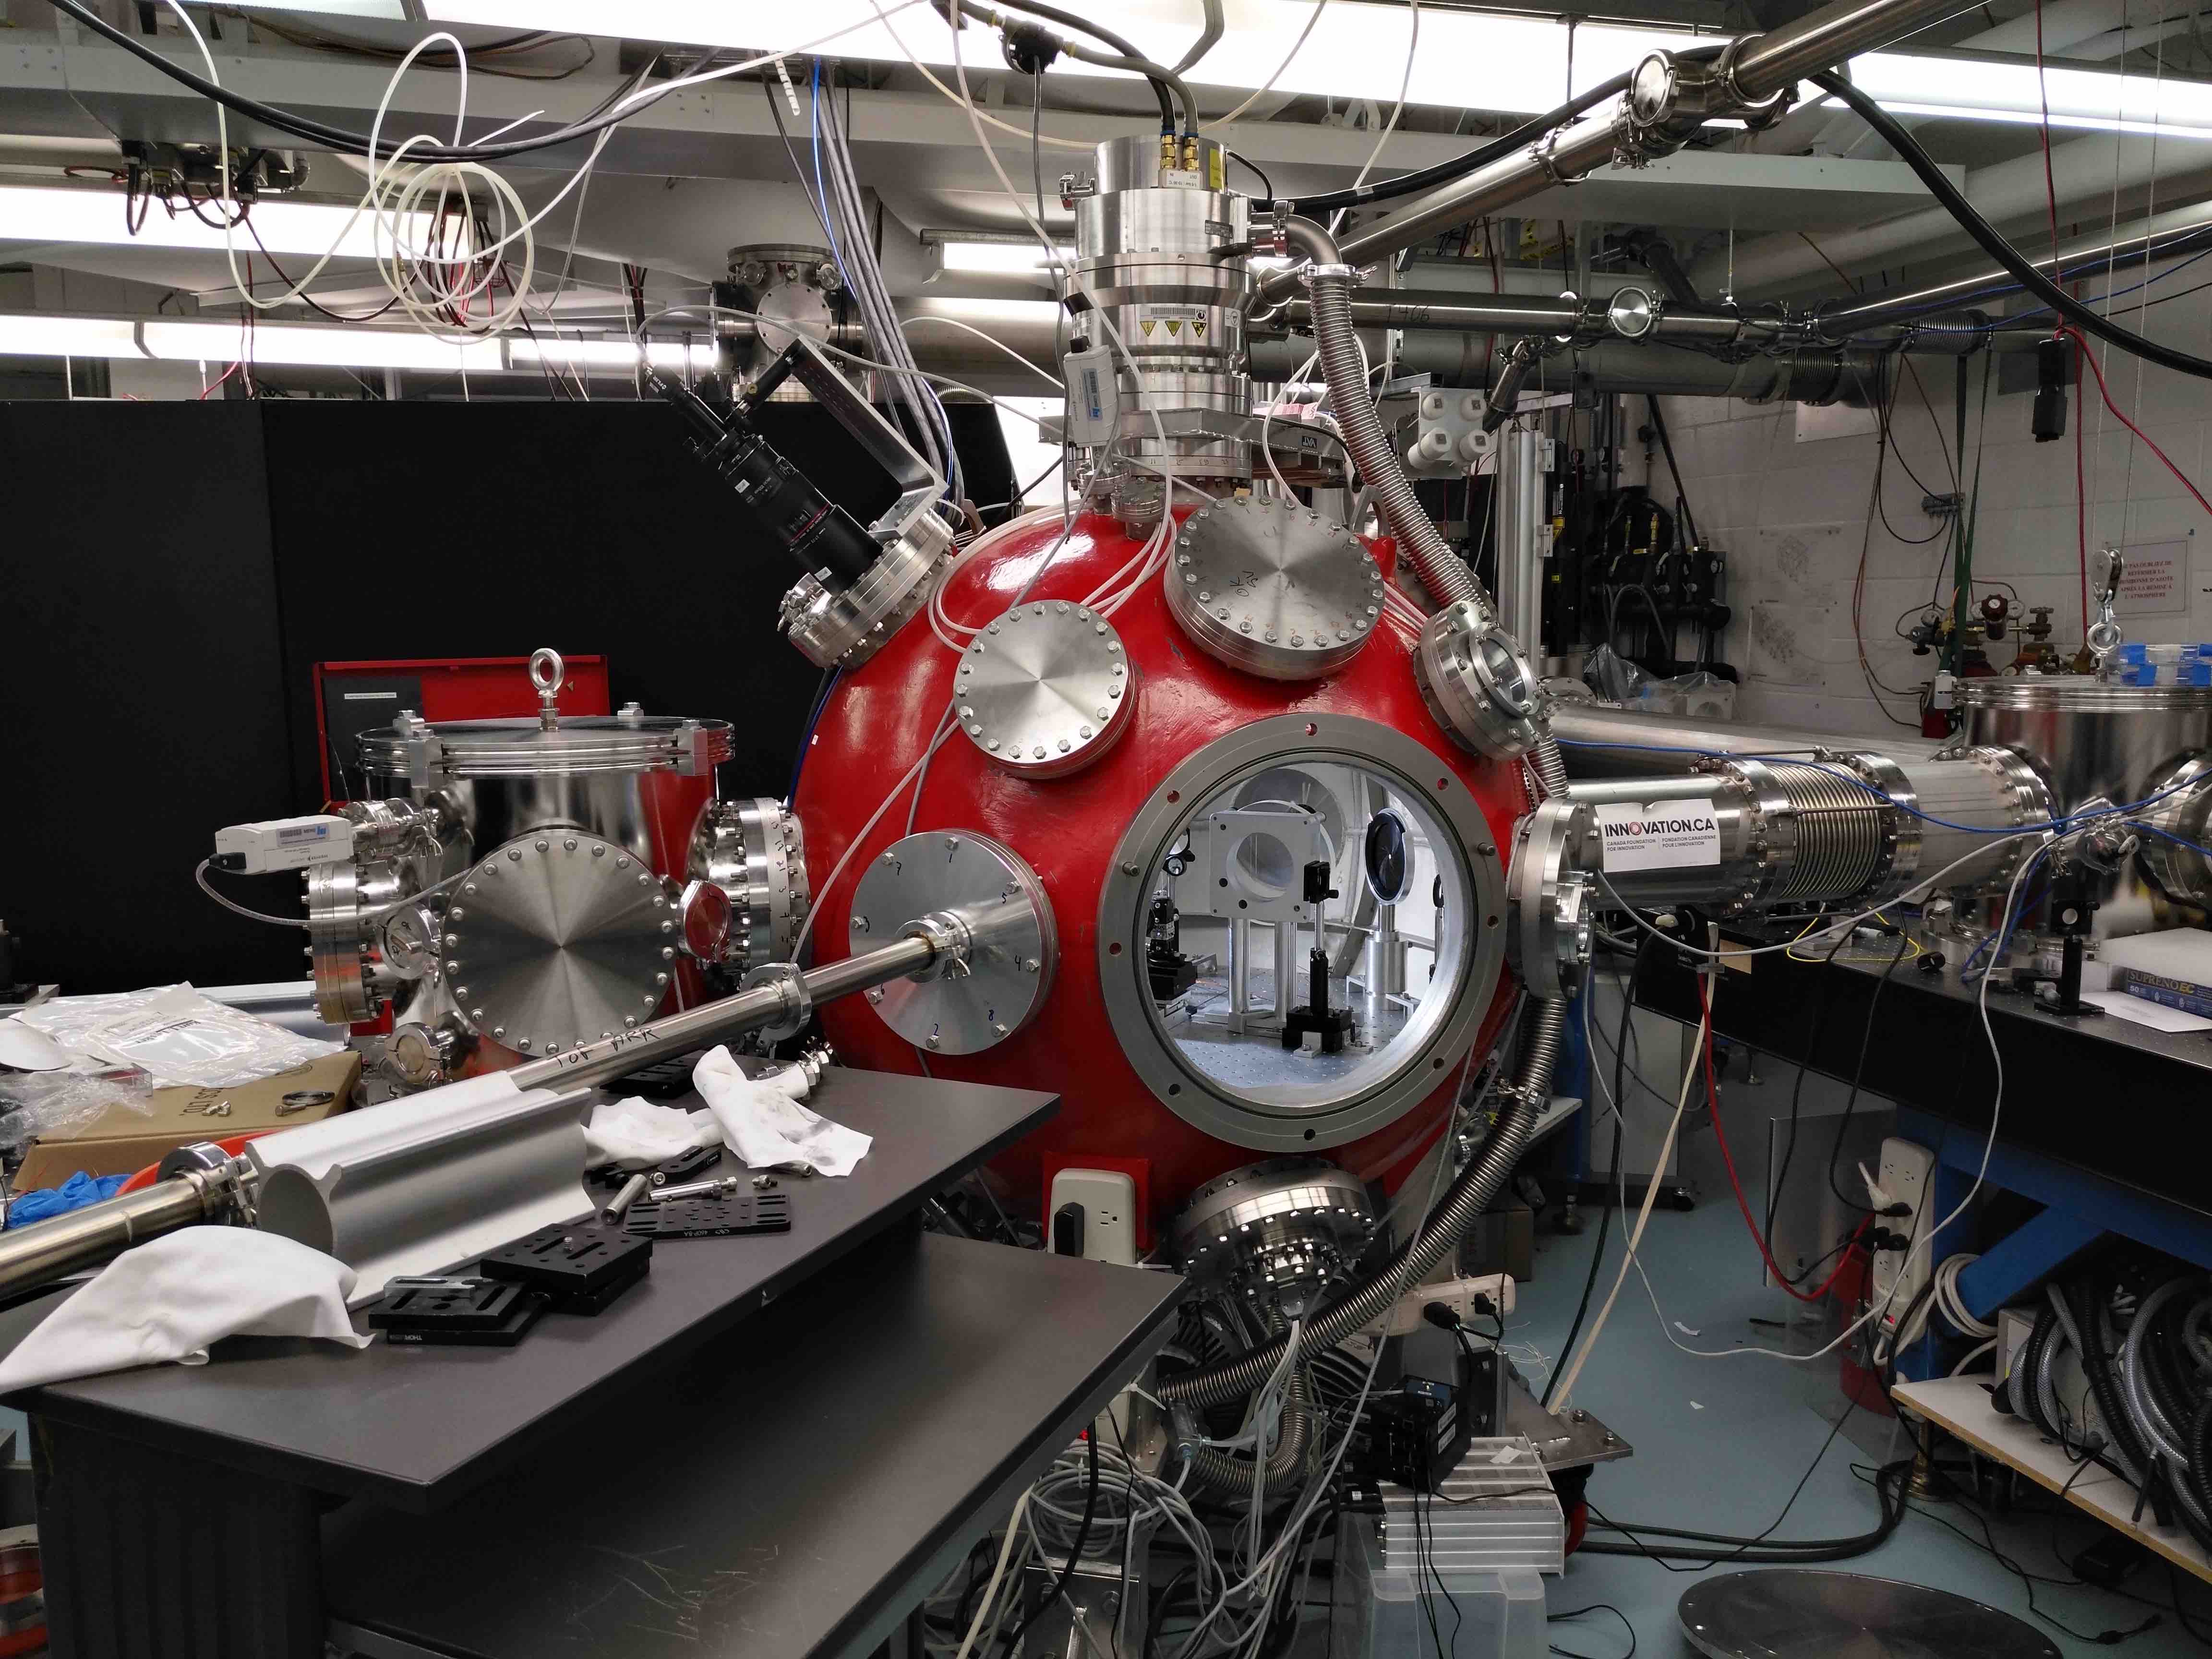 Target chamber devoted to ion acceleration experients